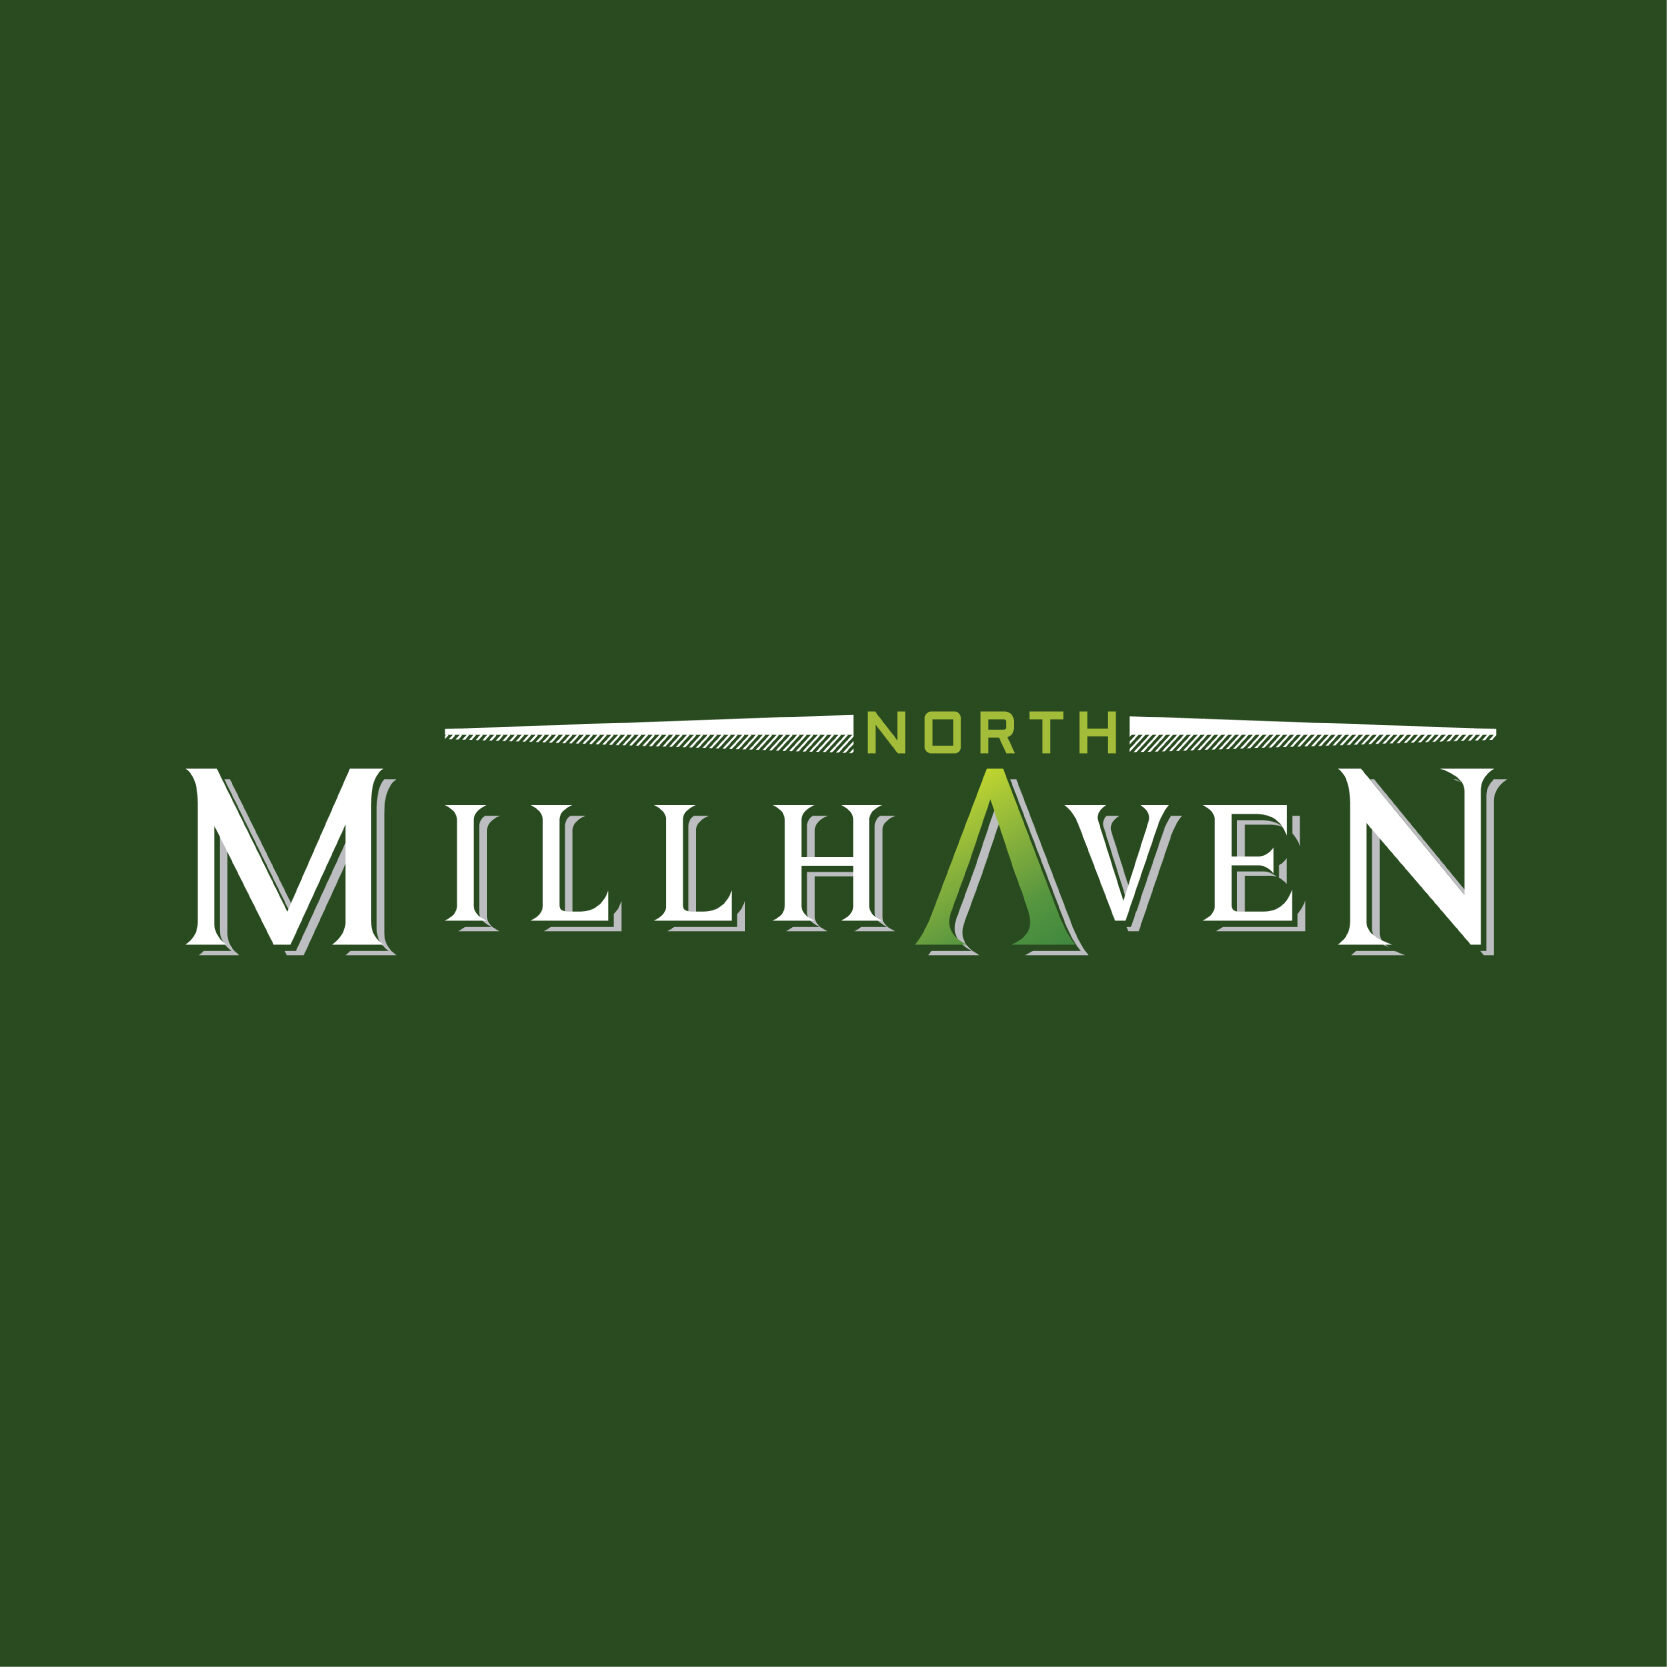 Millhaven North | SnapMe Creative